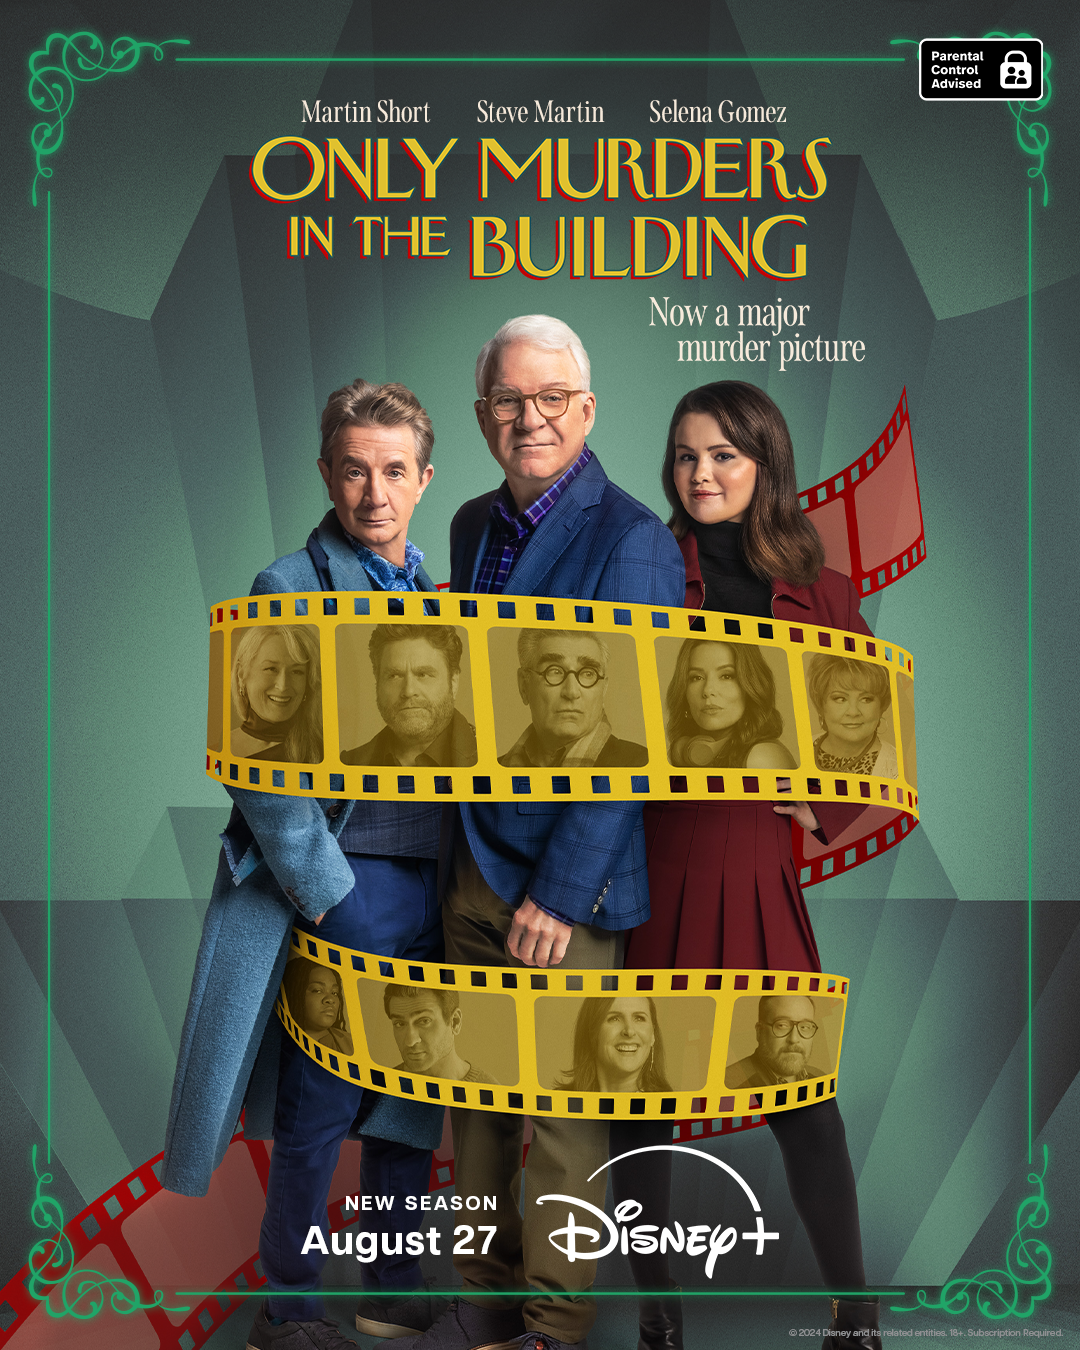 DISNEY+ UNCOVERS KEY ART FOR “ONLY MURDERS IN THE BUILDING” SEASON FOUR